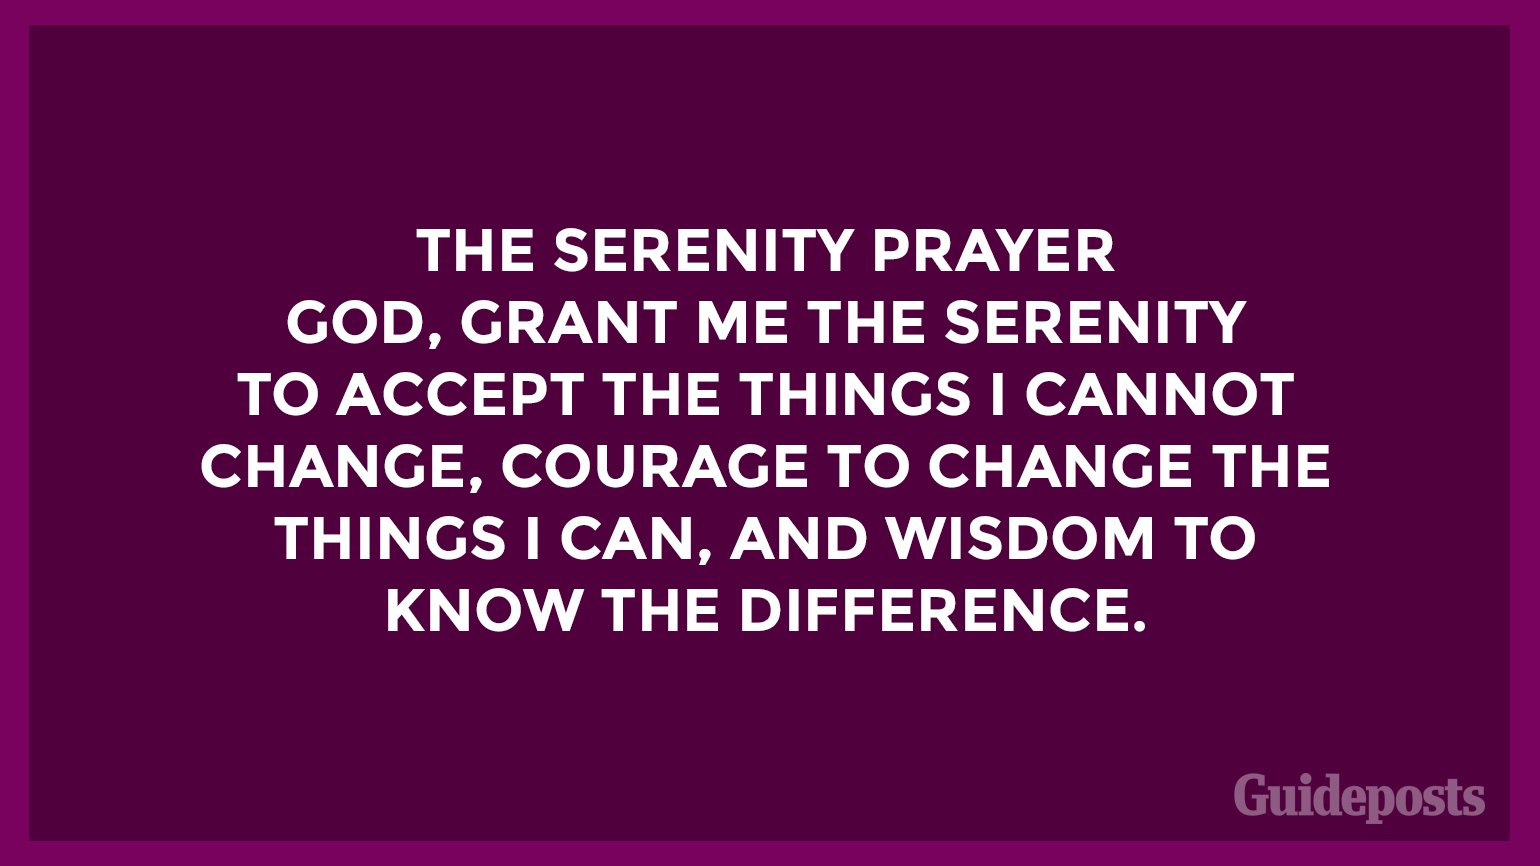 The Serenity Prayer  God, grant me the serenity to accept the things I cannot change, courage to change the things I can, and wisdom to know the difference.